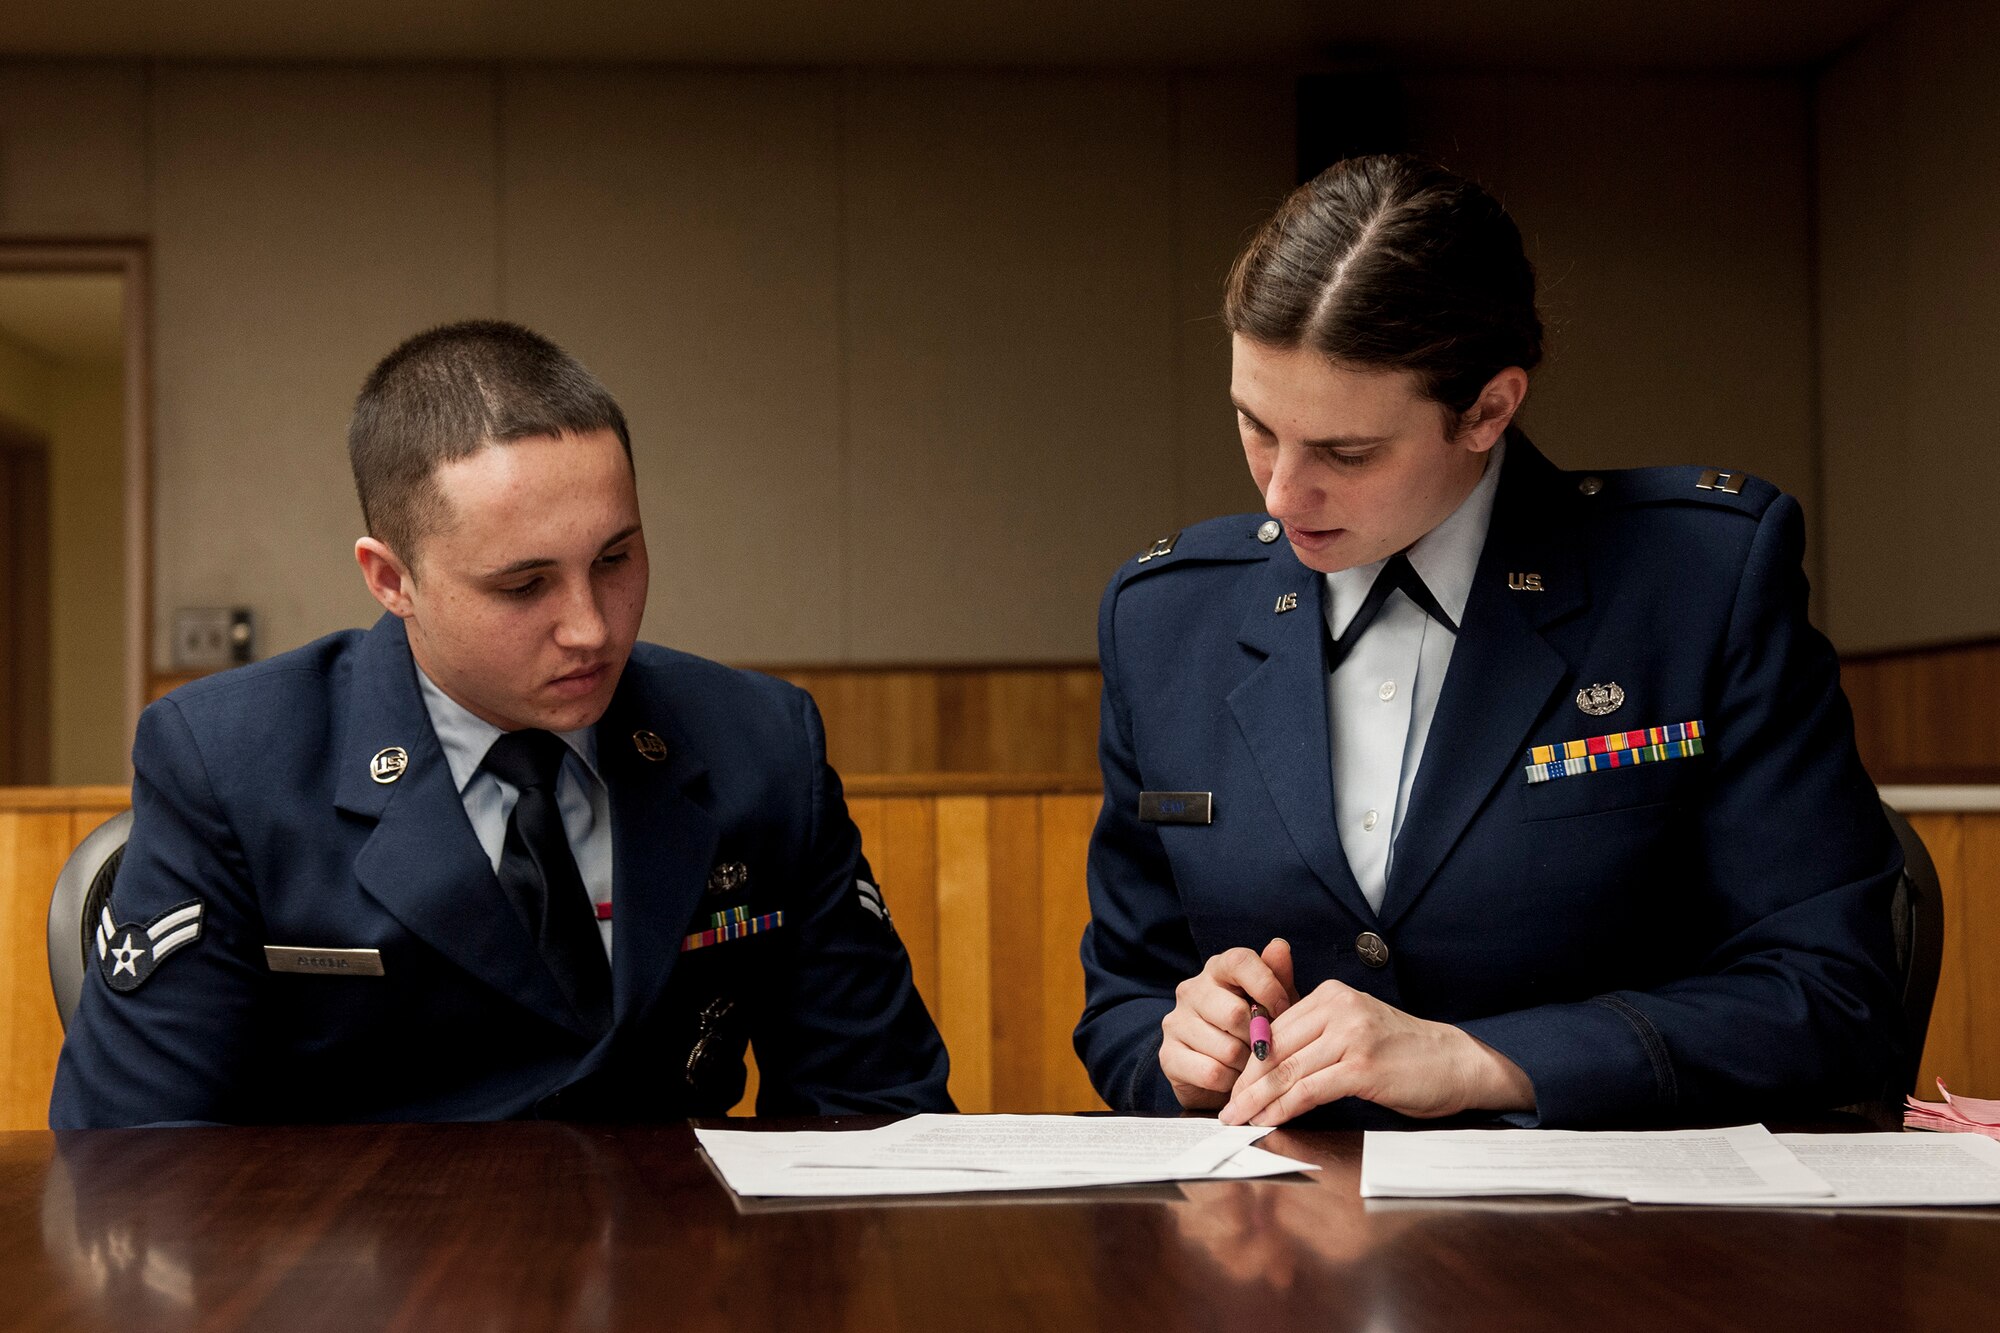 Capt. Erin Kenny (right) advises the alleged perpetrator, Airman 1st Class Adam Arruda,  during a sexual assault mock trial Feb. 24, 2015, at Kunsan Air Base, South Korea. Airmen from the Kunsan AB First Term Airmen Center have the opportunity to witness a realistic portrayal of a sexual assault trial every month. Kenny is an Area Defense Counsel attorney. (U.S. Air Force photo/Senior Airman Katrina Heikkinen)